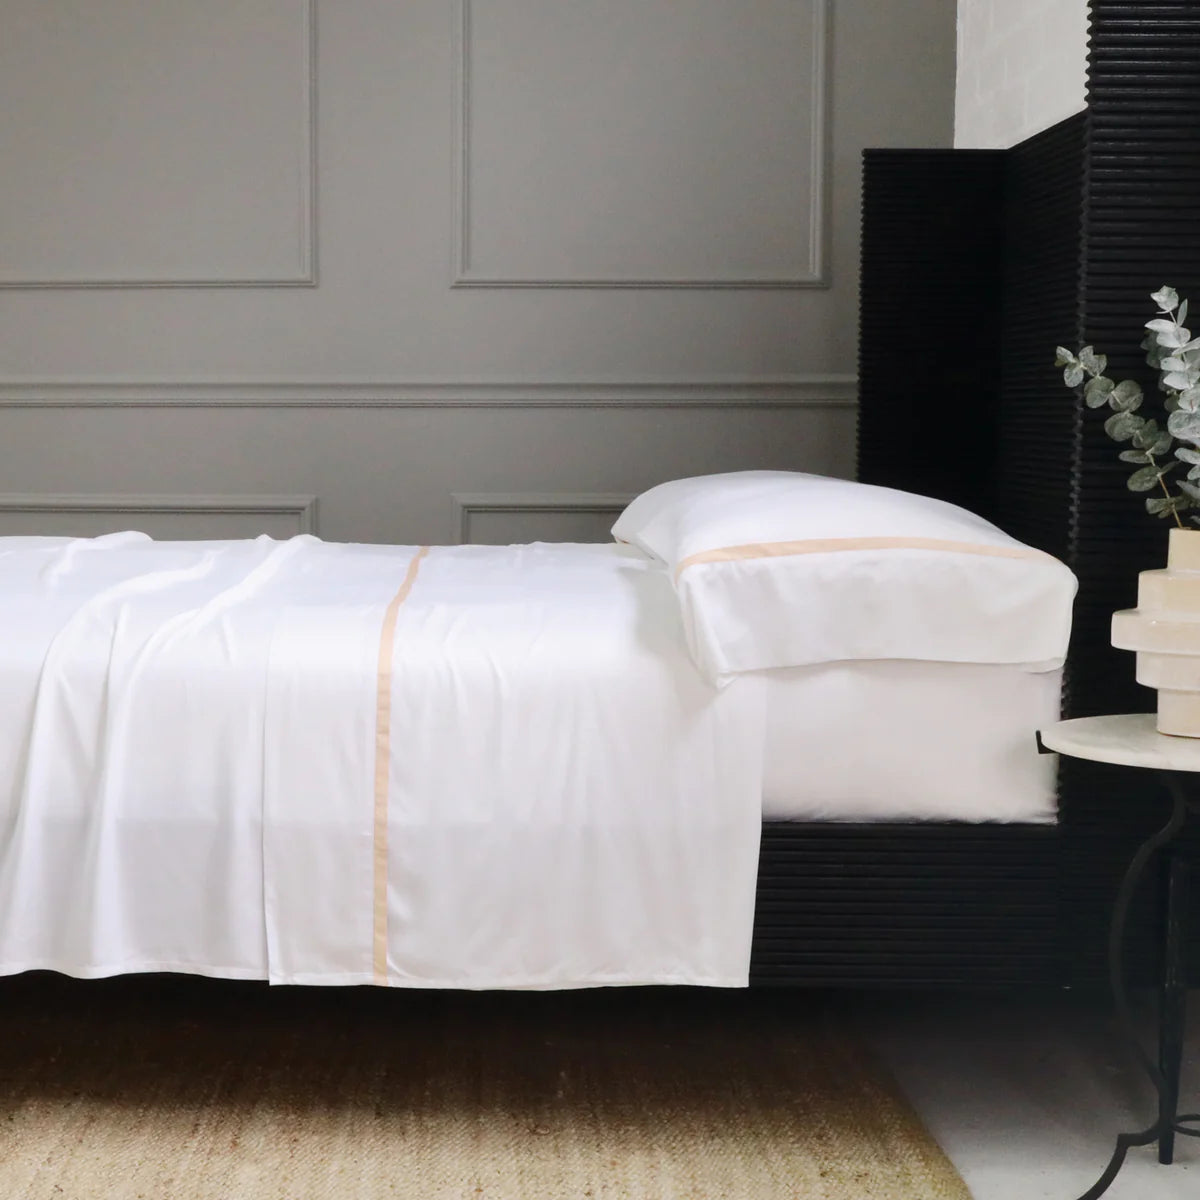 Langston Bamboo Sateen Sheet Set by Pom Pom at Home